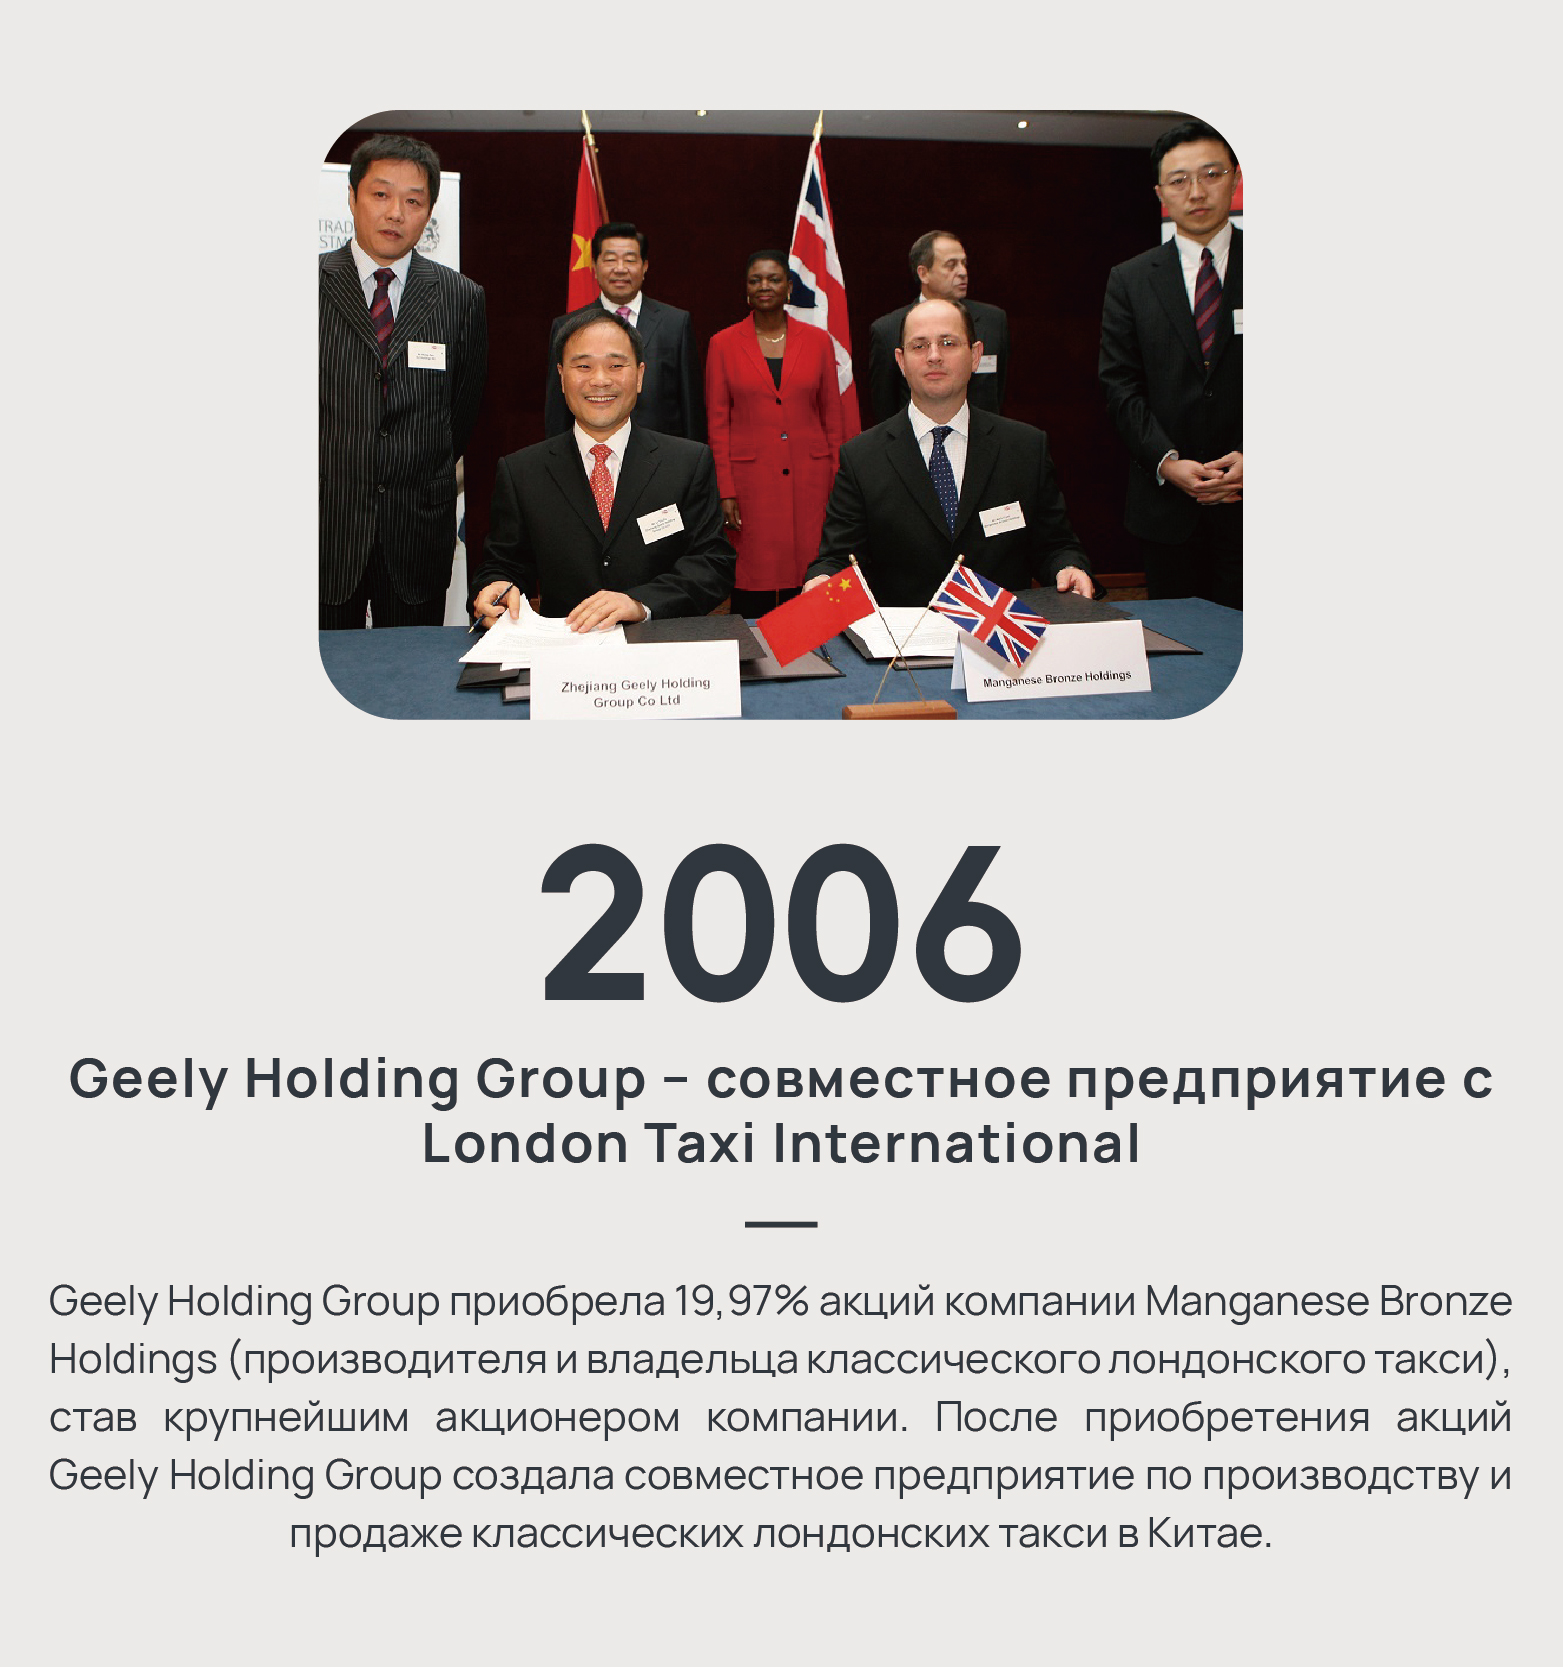 2006 - Geely Holding Group